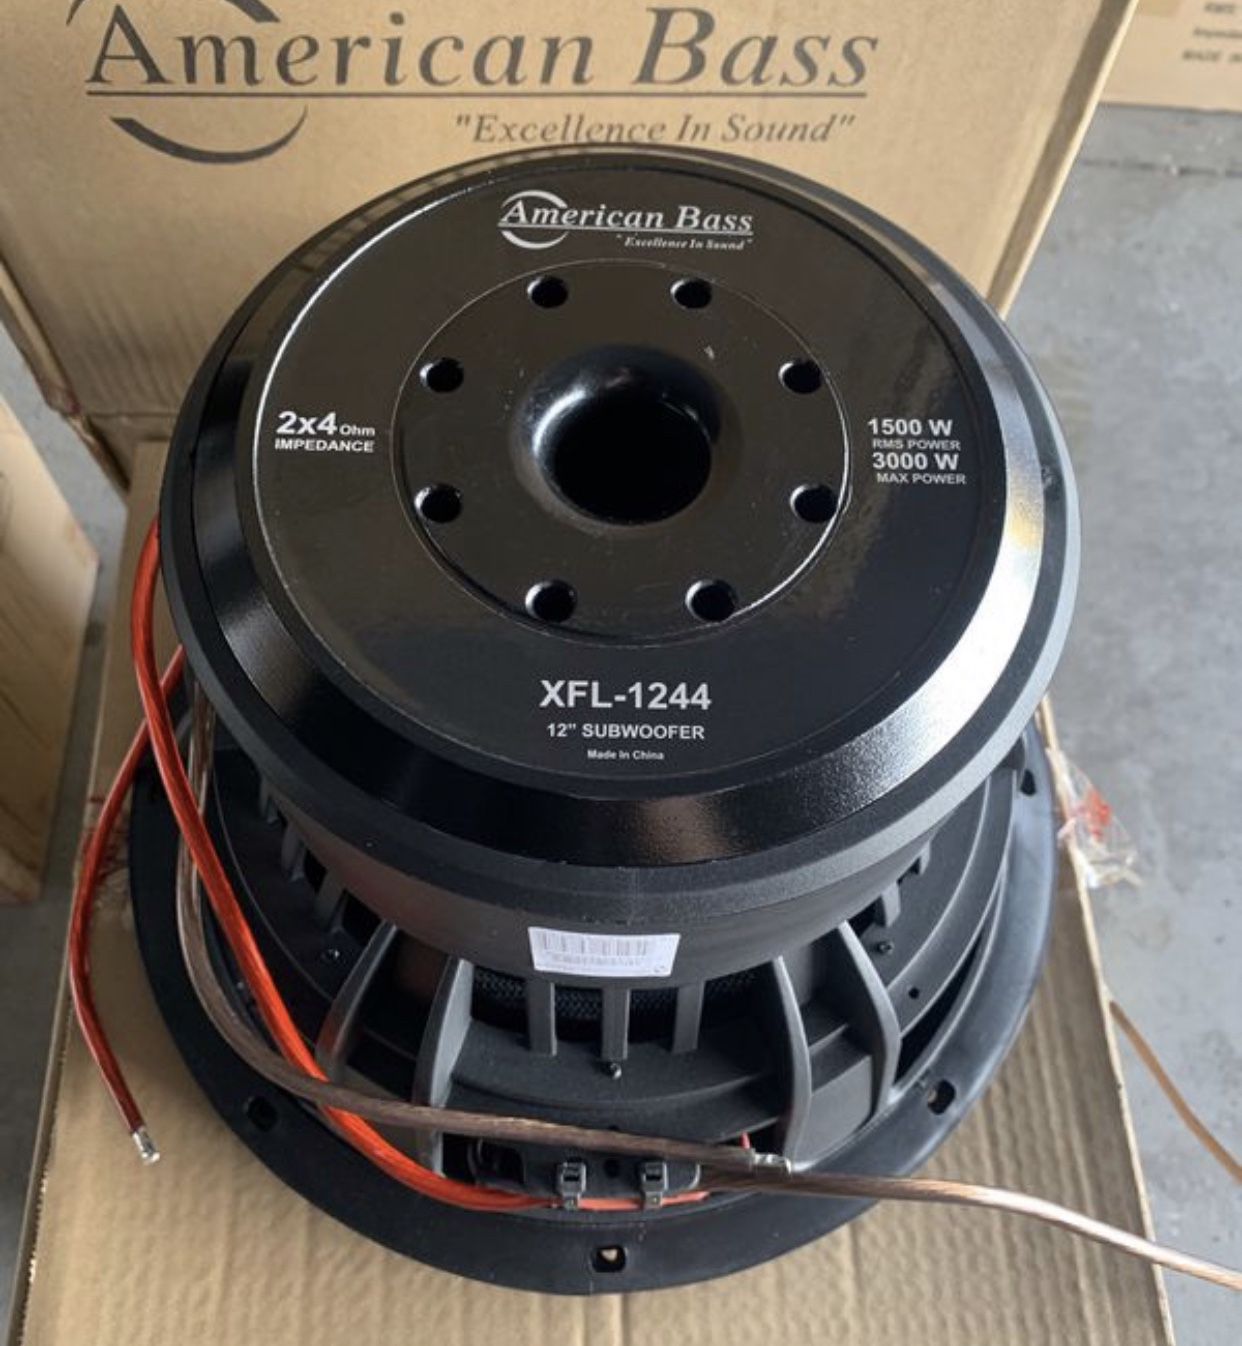 American Bass Car Audio . 12 Inch Car Stereo Subwoofer . XFL Series . 3000 watts . New Years Super Sale . $189 While They Last New